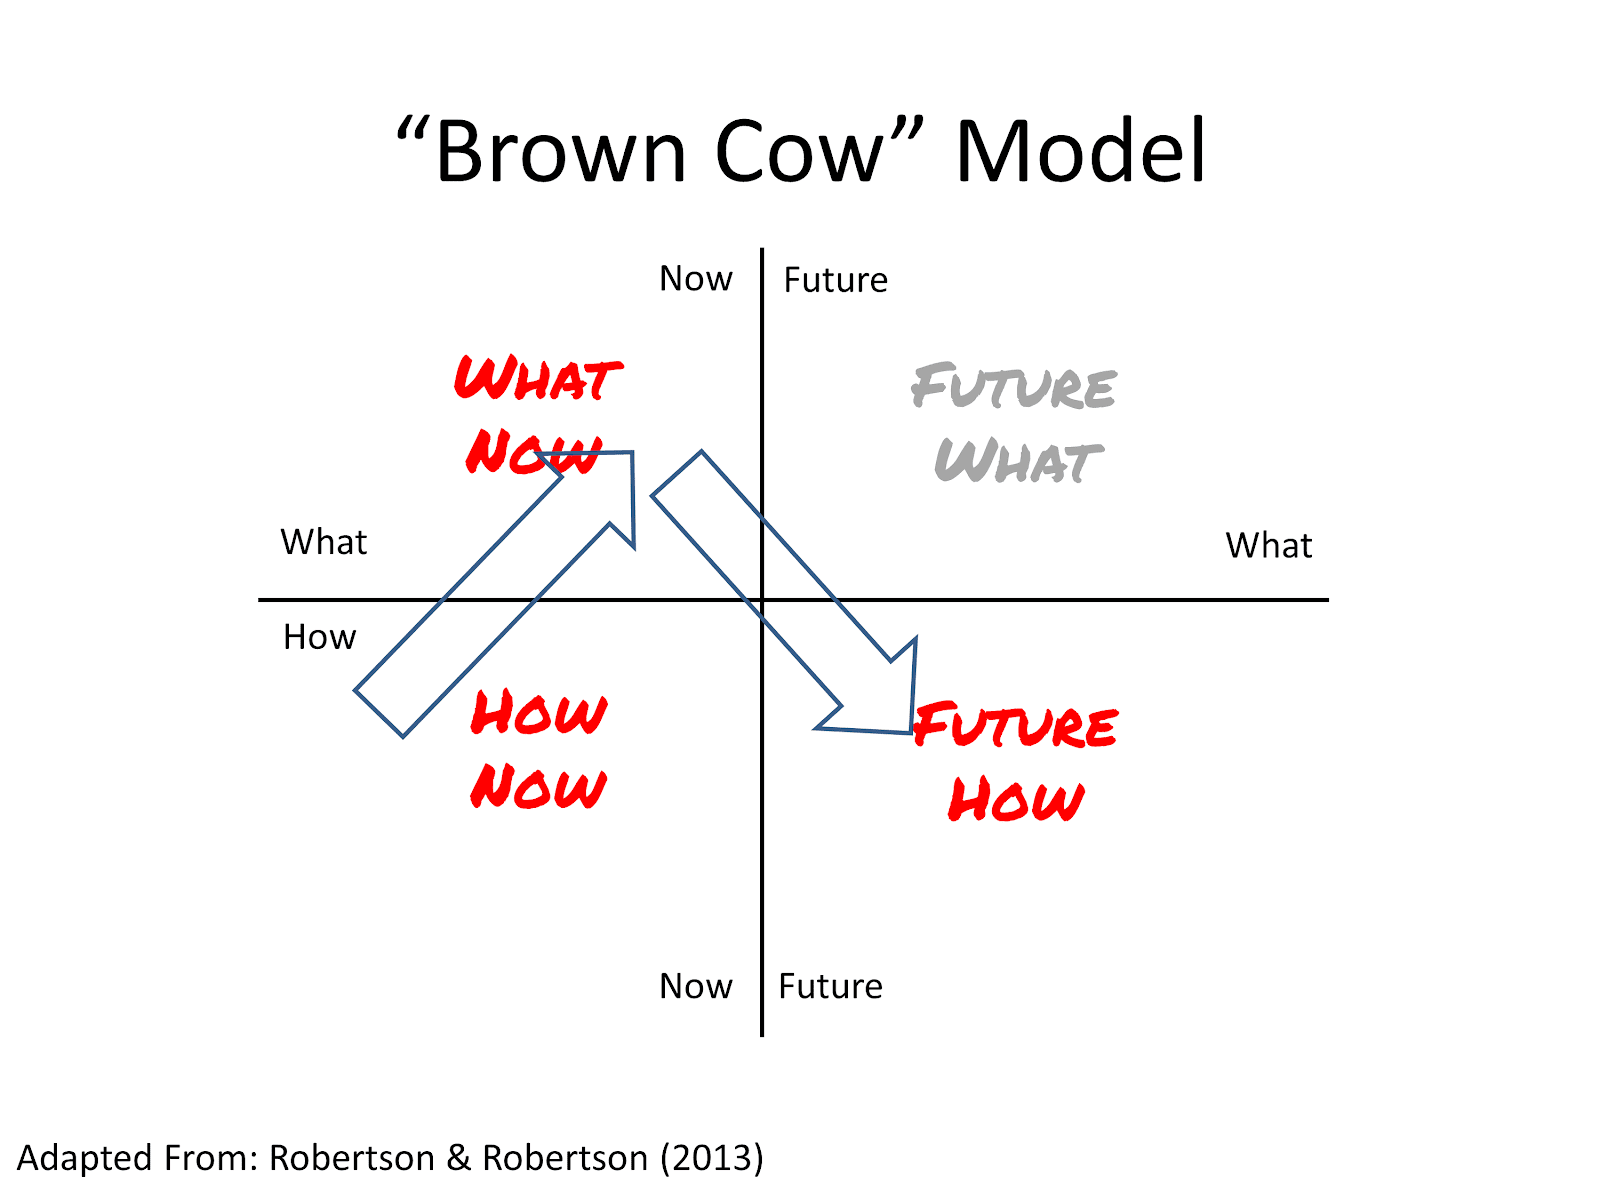 Brown Cow Model. Four quadrants. How Now, What Now, Future What, Future How. From Robertson & Robertson (2013)